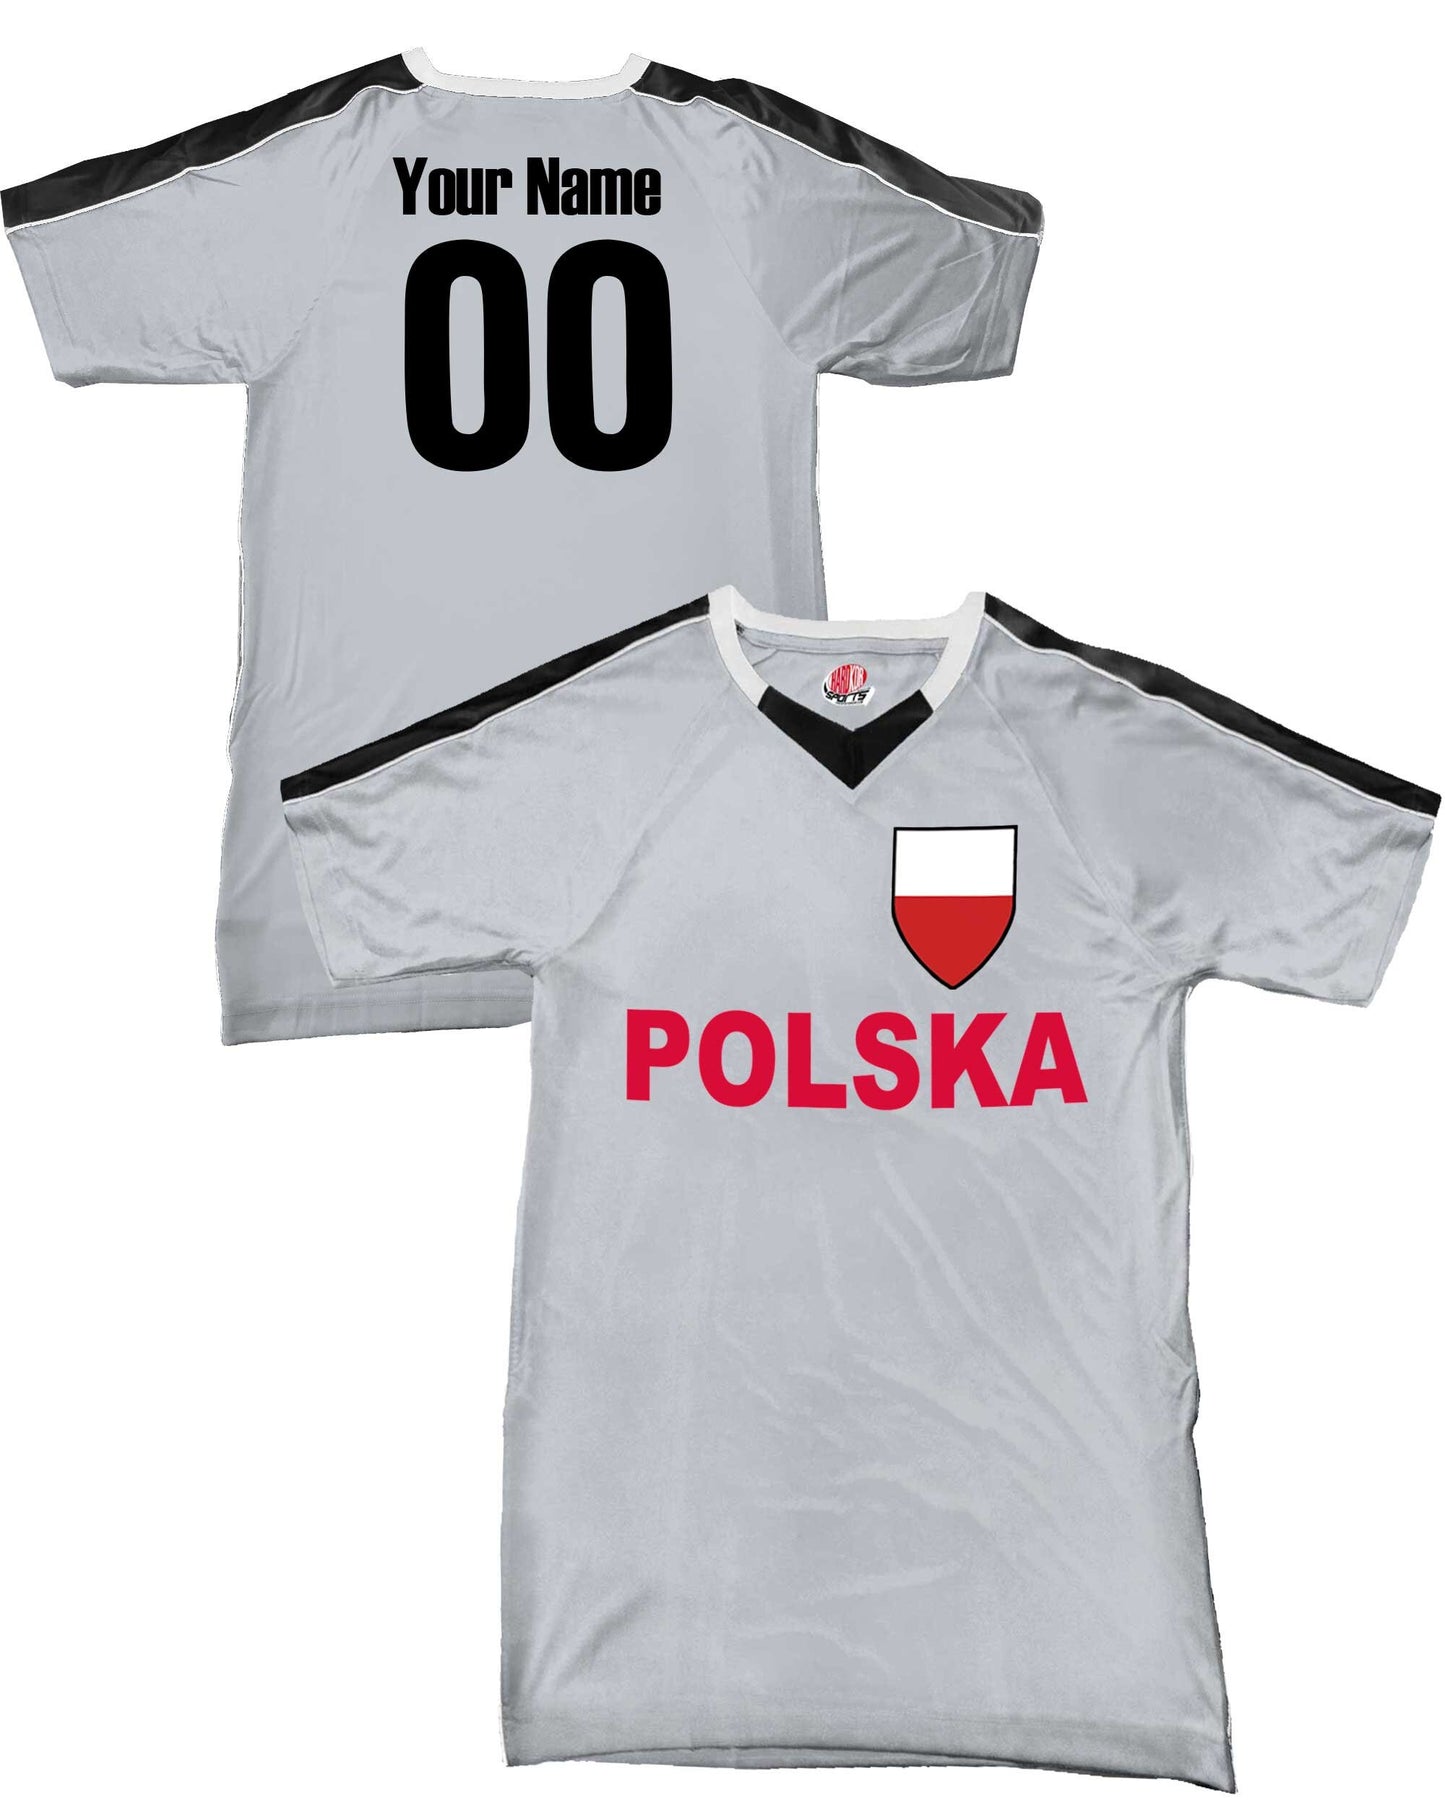 Polska Soccer Jersey Poland Country Name Written in Polish, Personalized with your Player name and Number on back